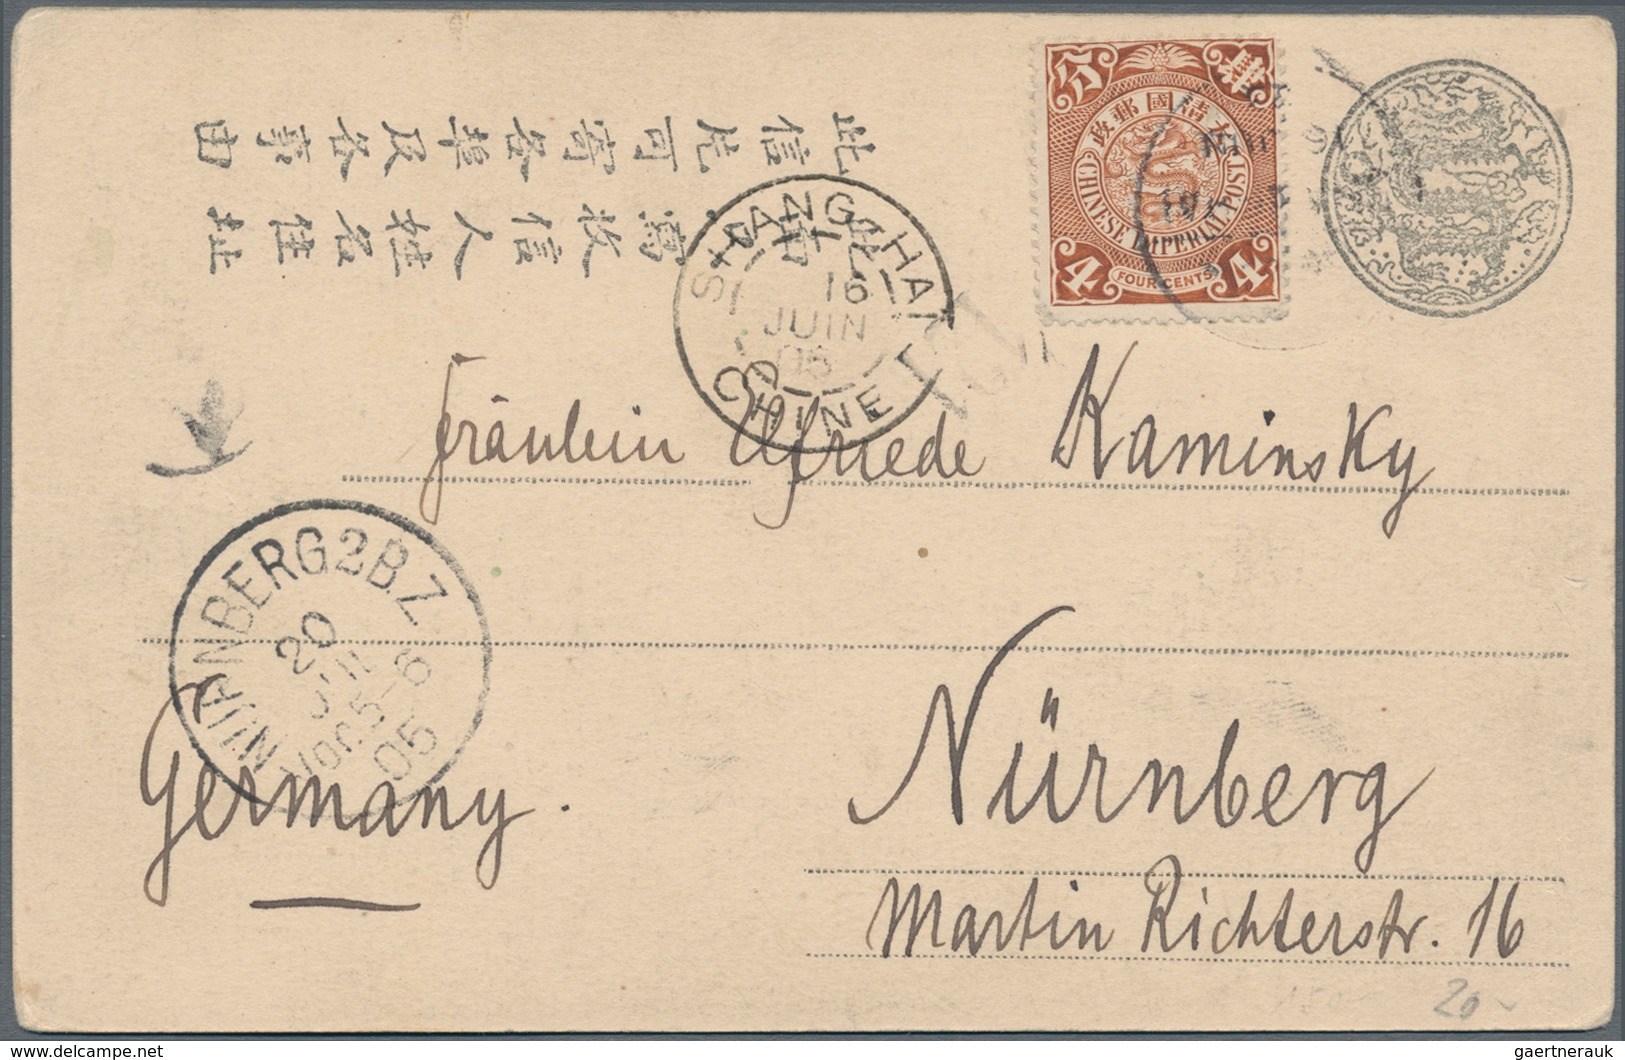 China: 1902/09, coiling dragons on ppc (5) from Shanghai (4) or Peking (1) to Austria, France or Ger